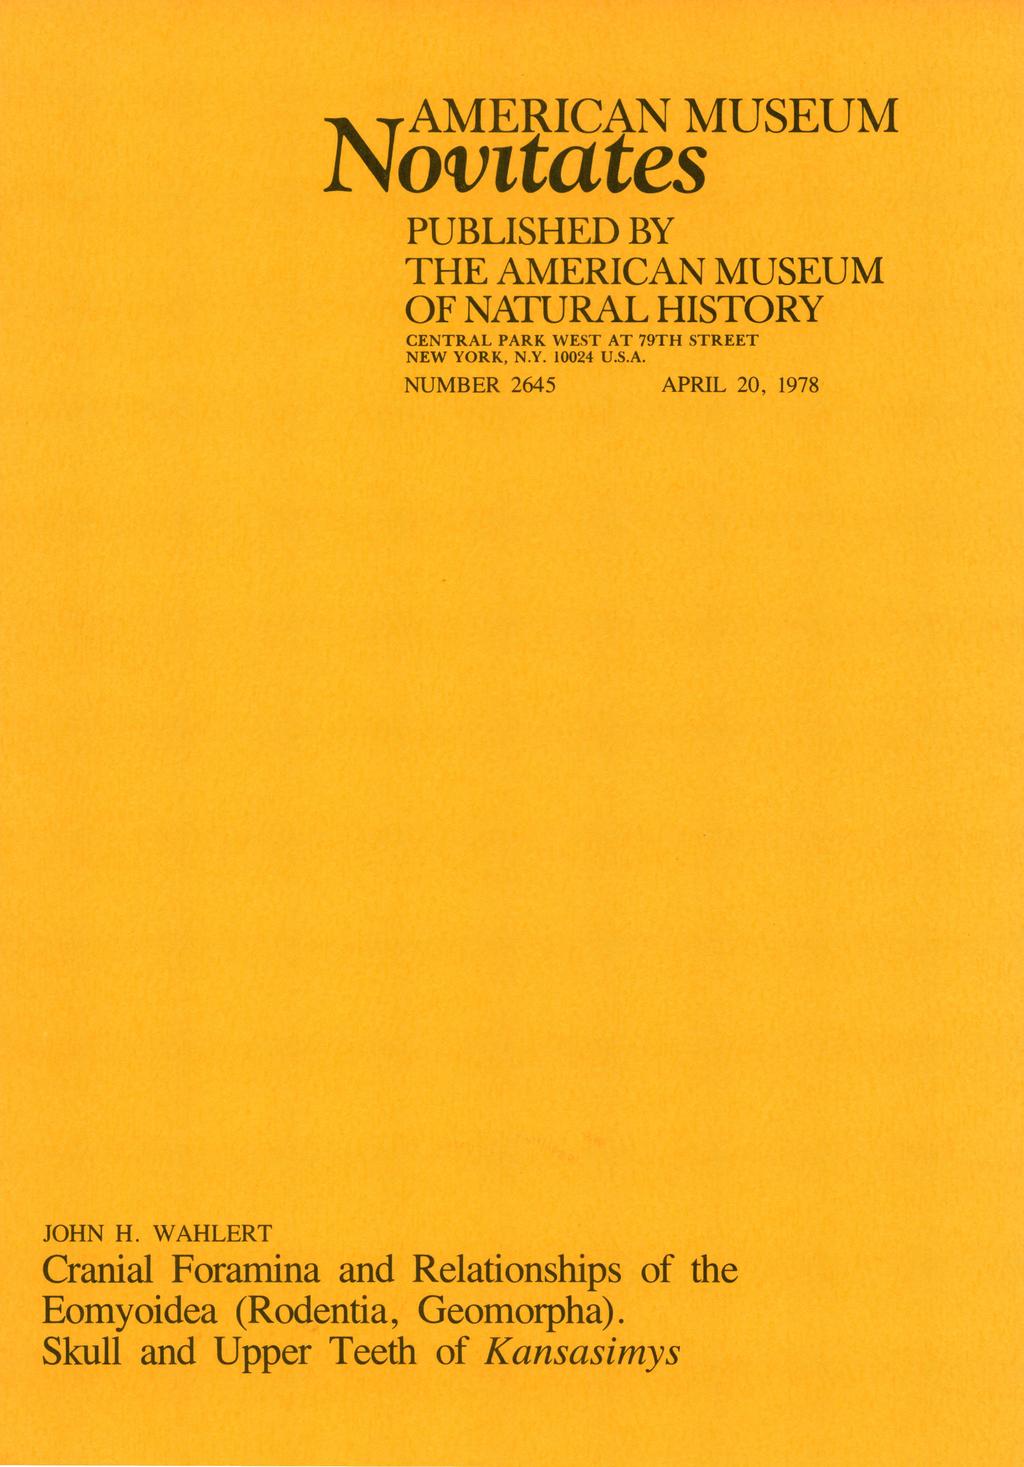 AMERICAN MUSEUM Novitates PUBLISHED BY THE AMERICAN MUSEUM OF NATURAL HISTORY CENTRAL PARK WEST AT 79TH STREET NEW YORK, N.Y. 10024 U.S.A. NUMBER 2645 APRIL 20, 1978 JOHN H.